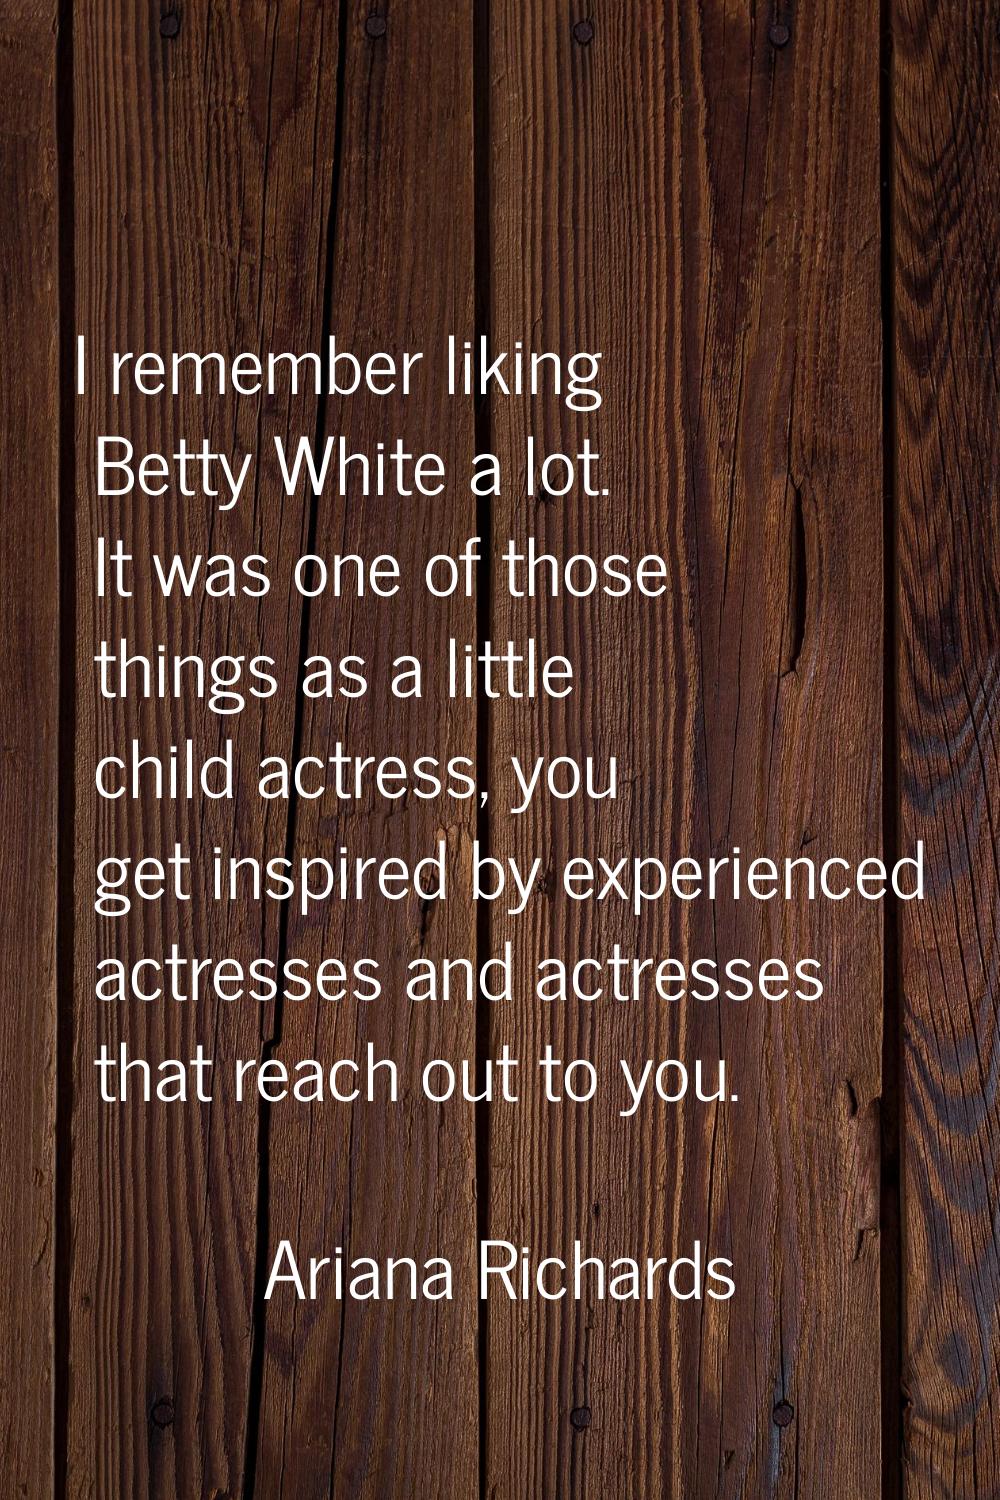 I remember liking Betty White a lot. It was one of those things as a little child actress, you get 